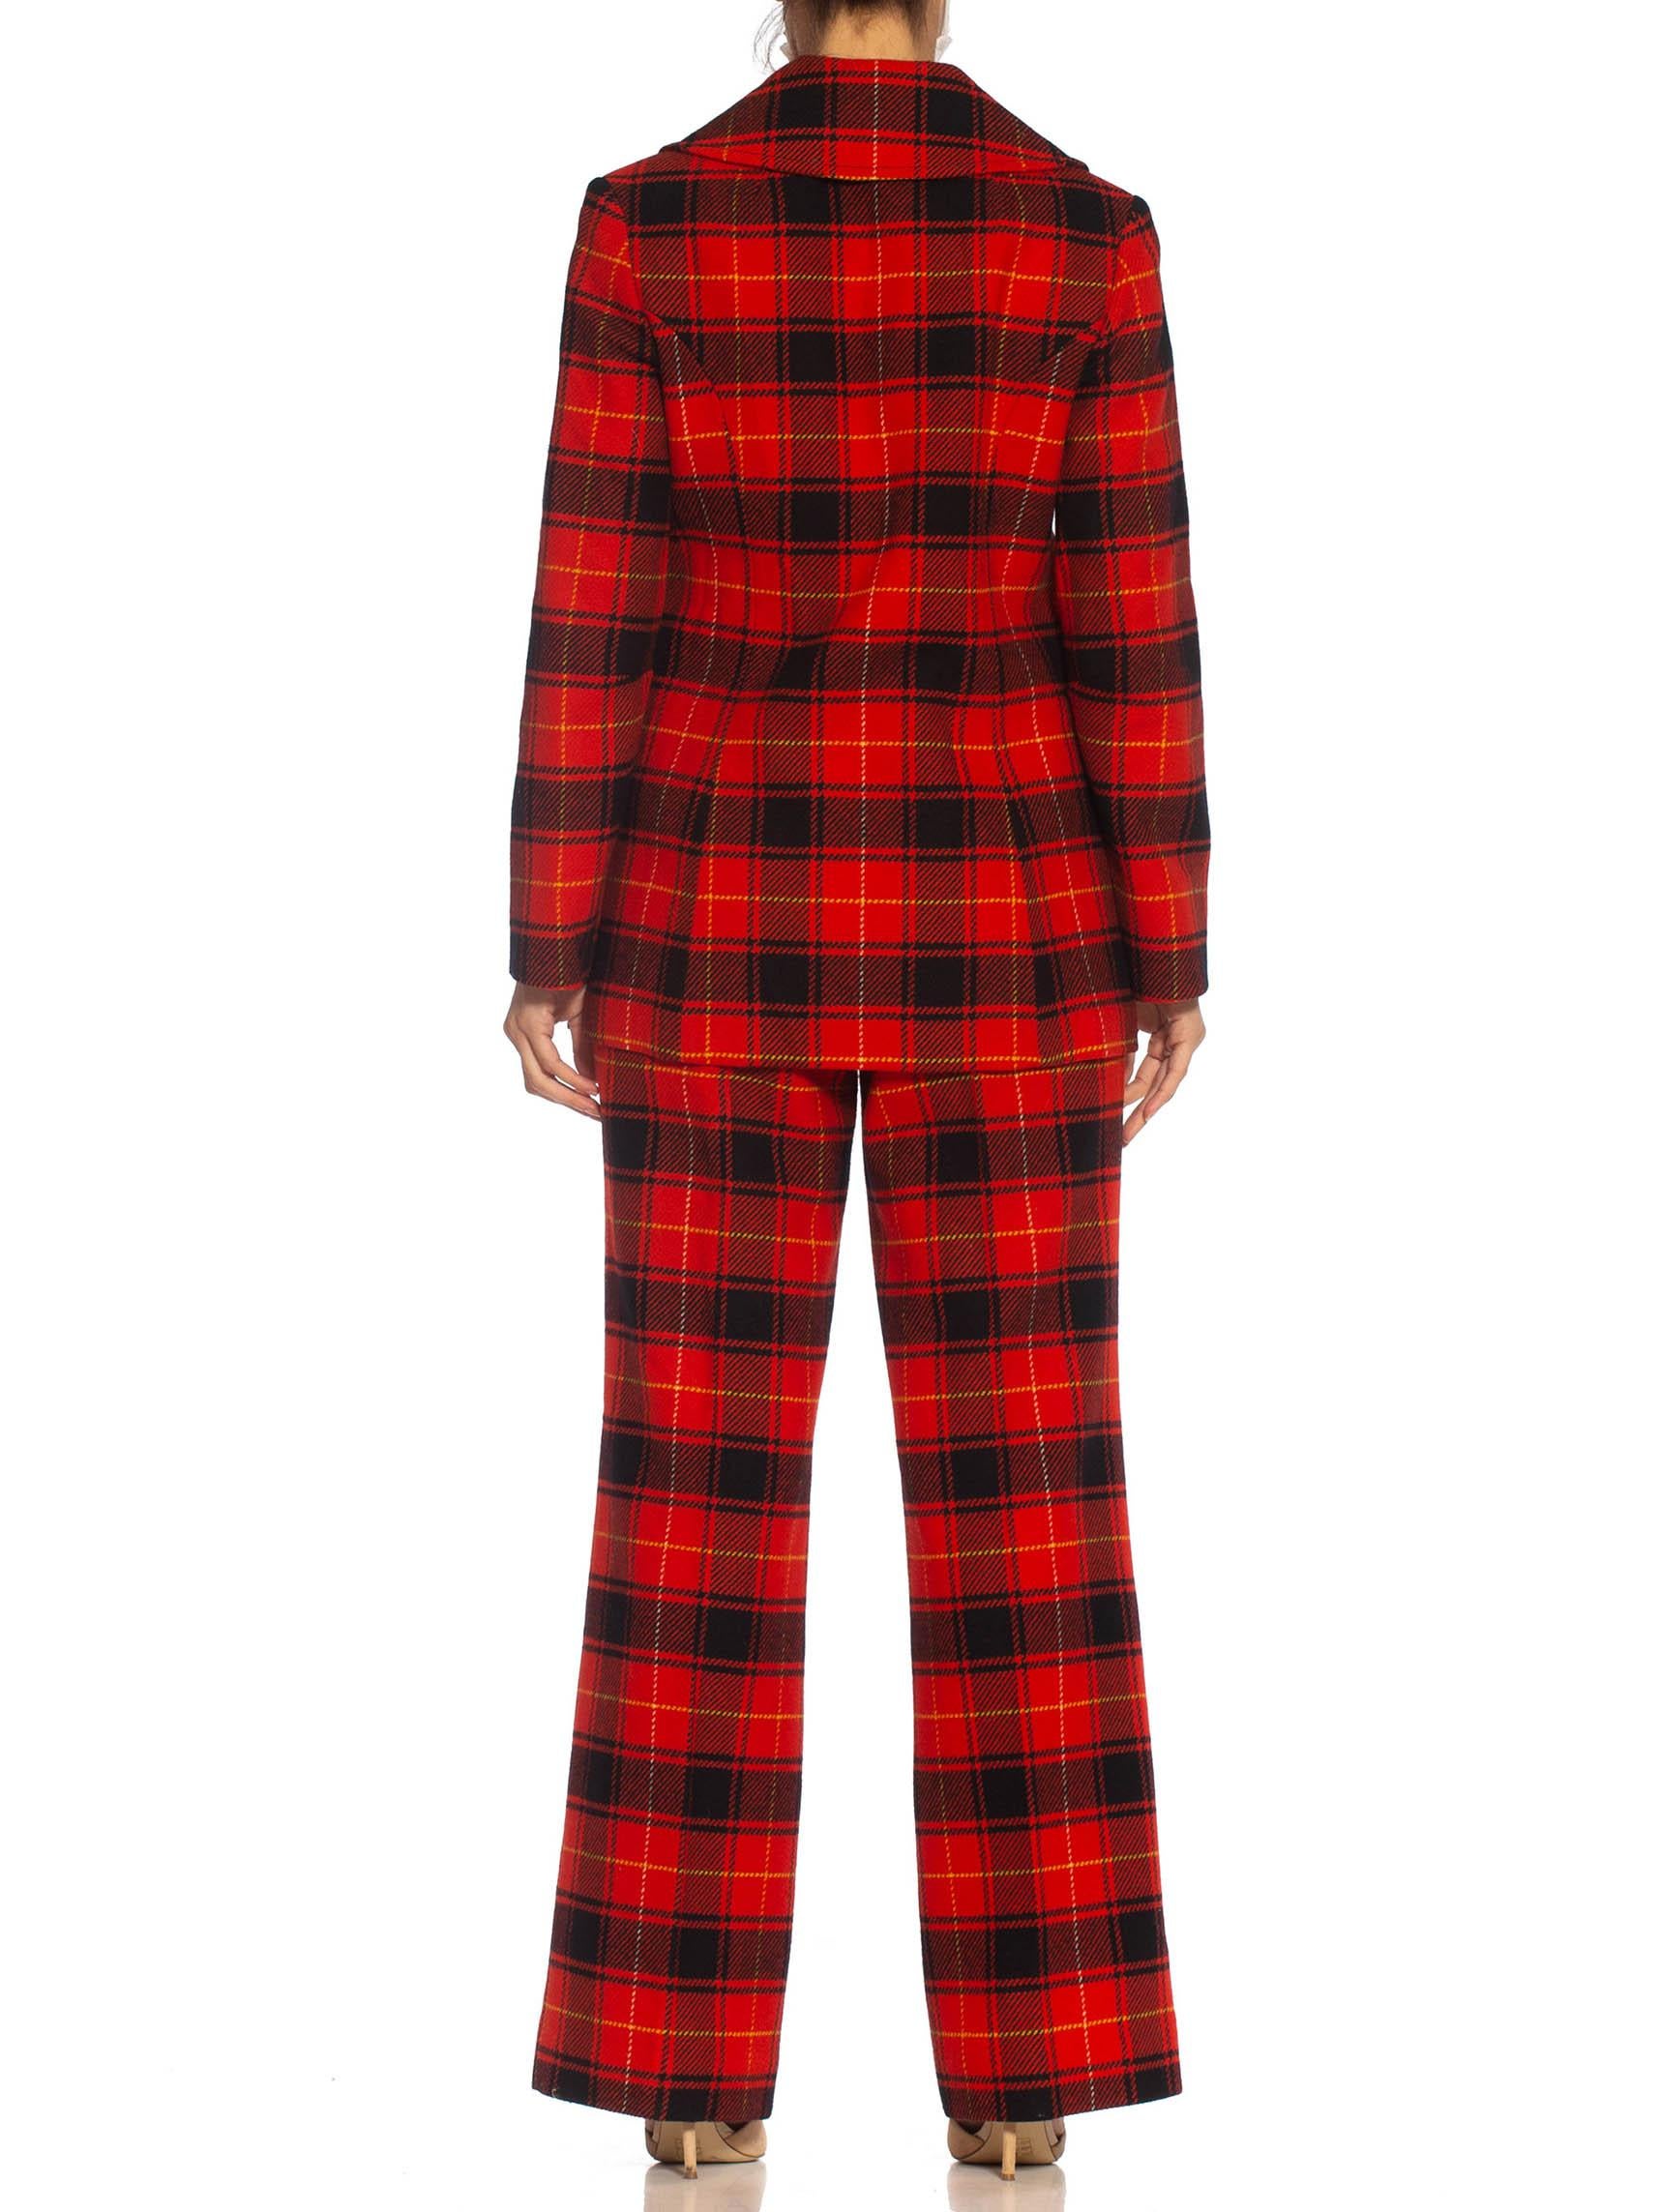 1960S PENDLETON Red & Black Plaid Wool Fully Lined, Wide Lapel Pant Suit For Sale 4